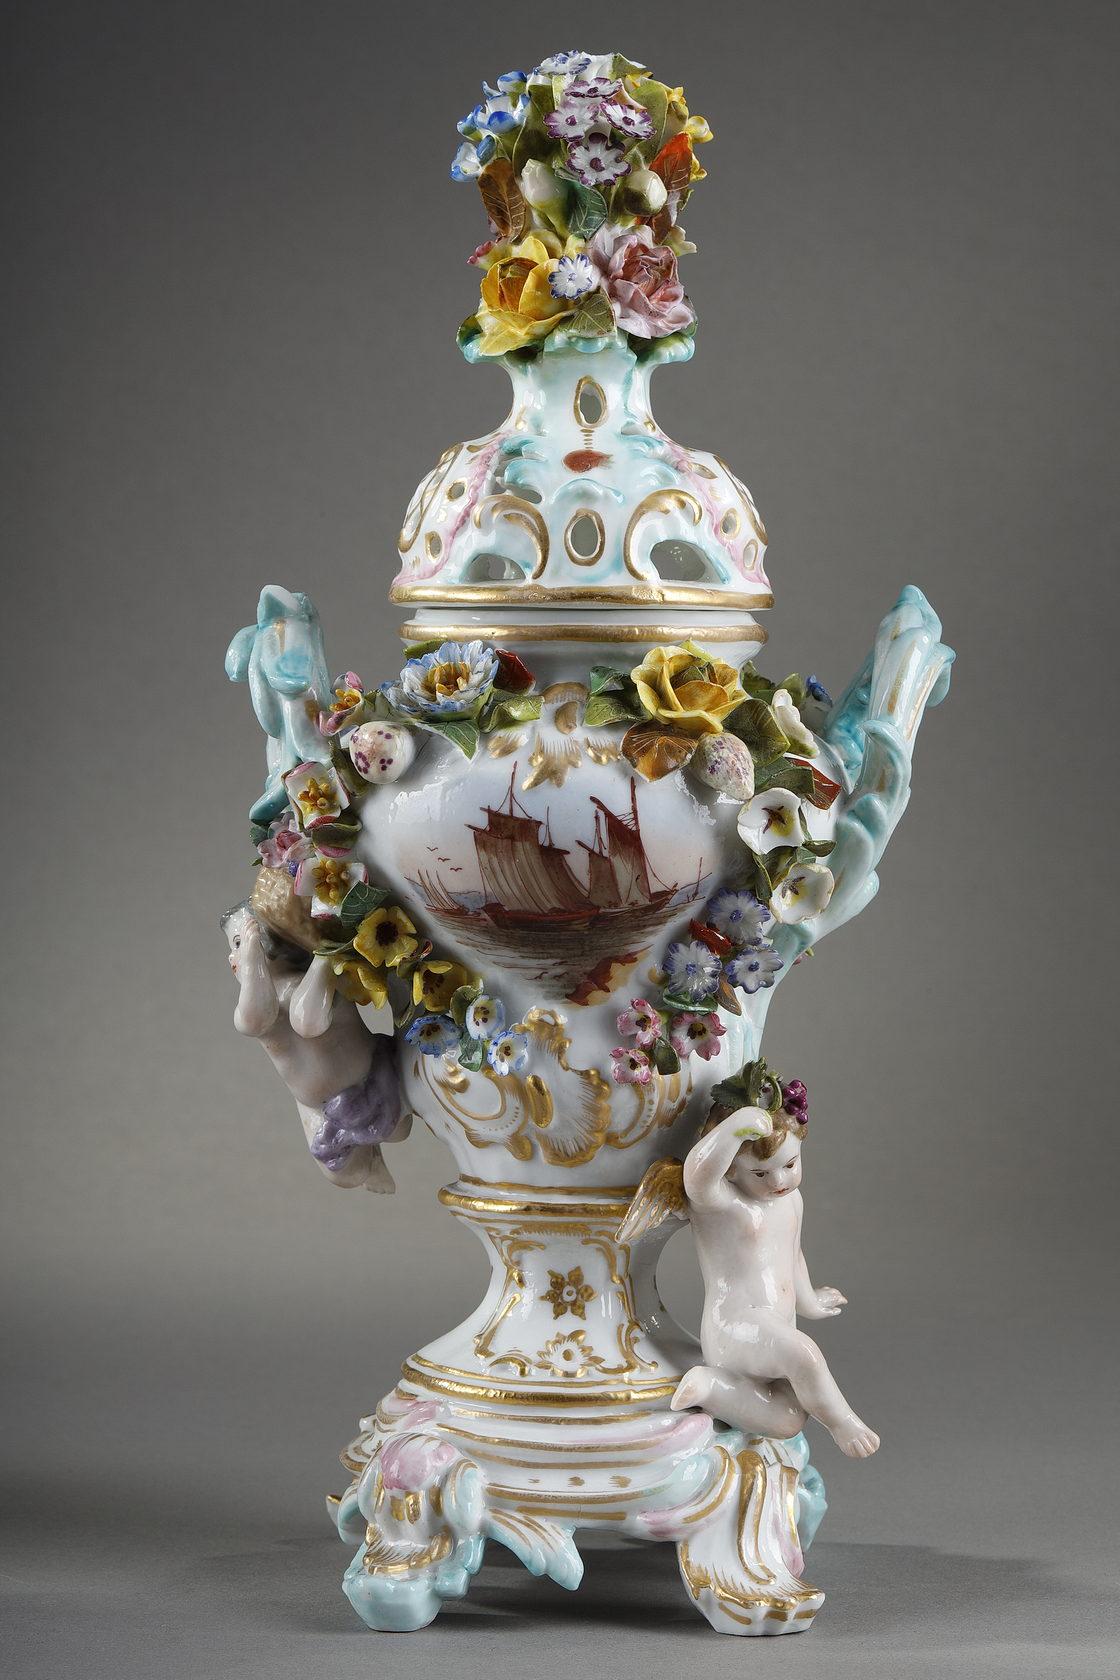 French Pair of Polychrome and Gilt Porcelains from the Meissen Manufacture